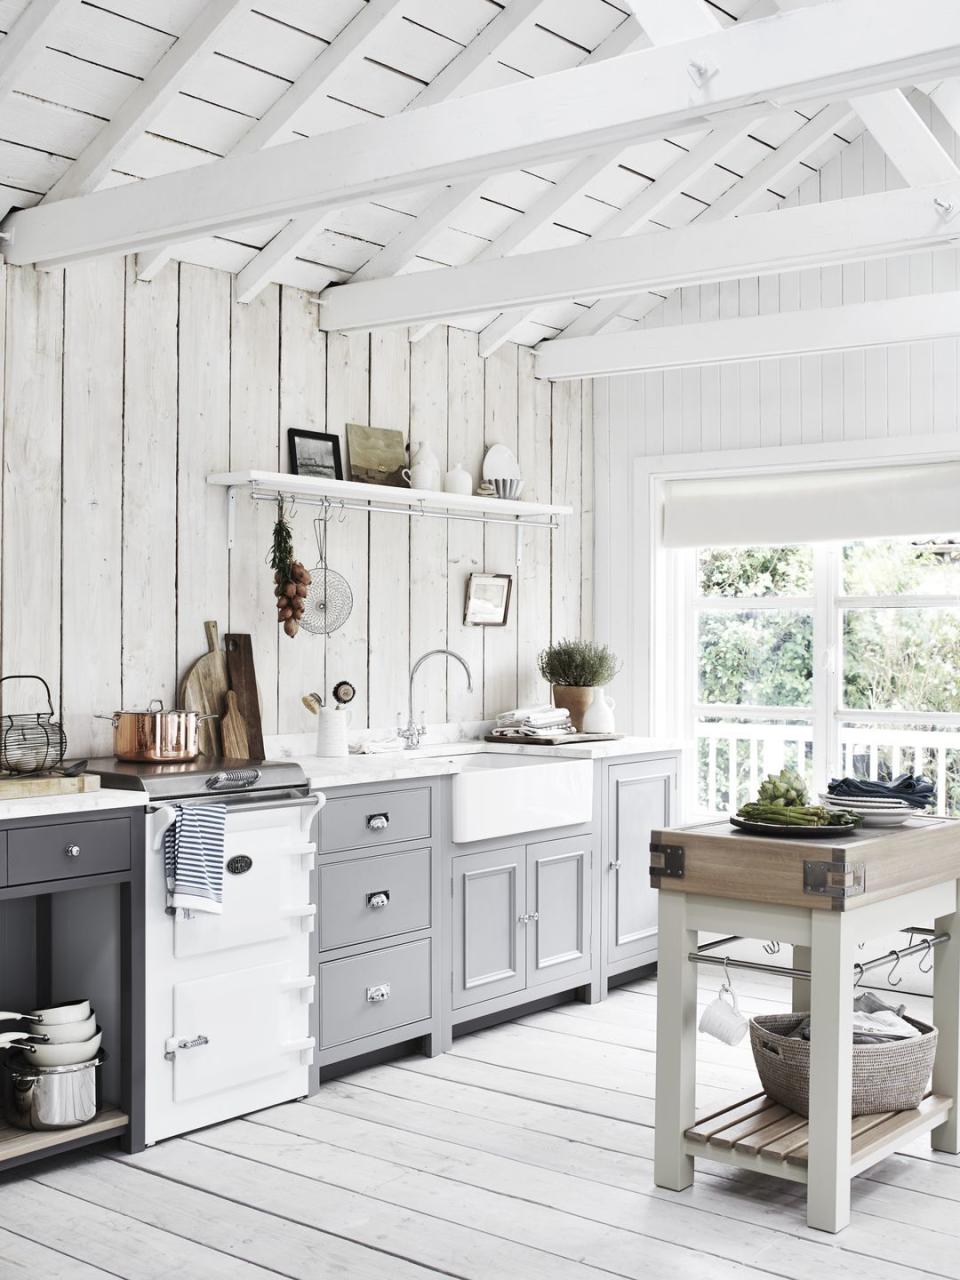 Country kitchens ideas: Wood on wood